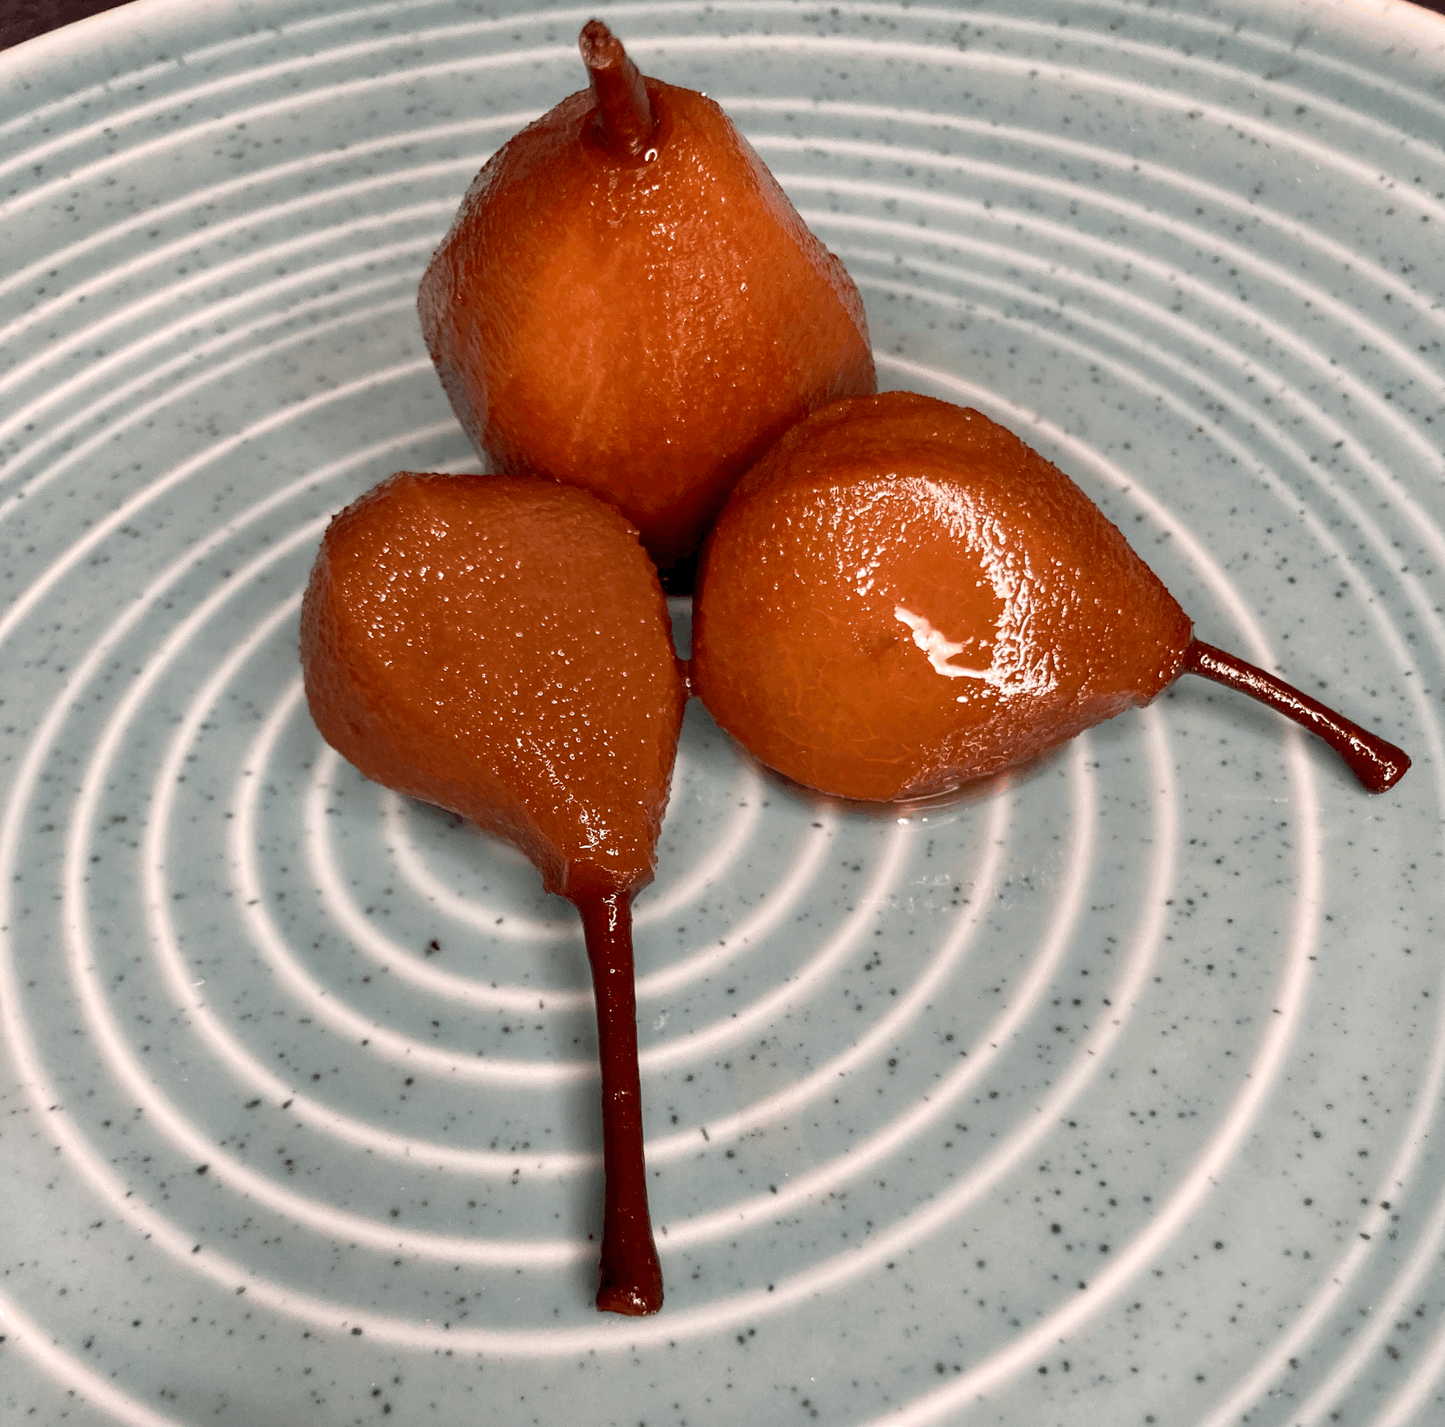 Pickled Pears from Fruits of the Forage